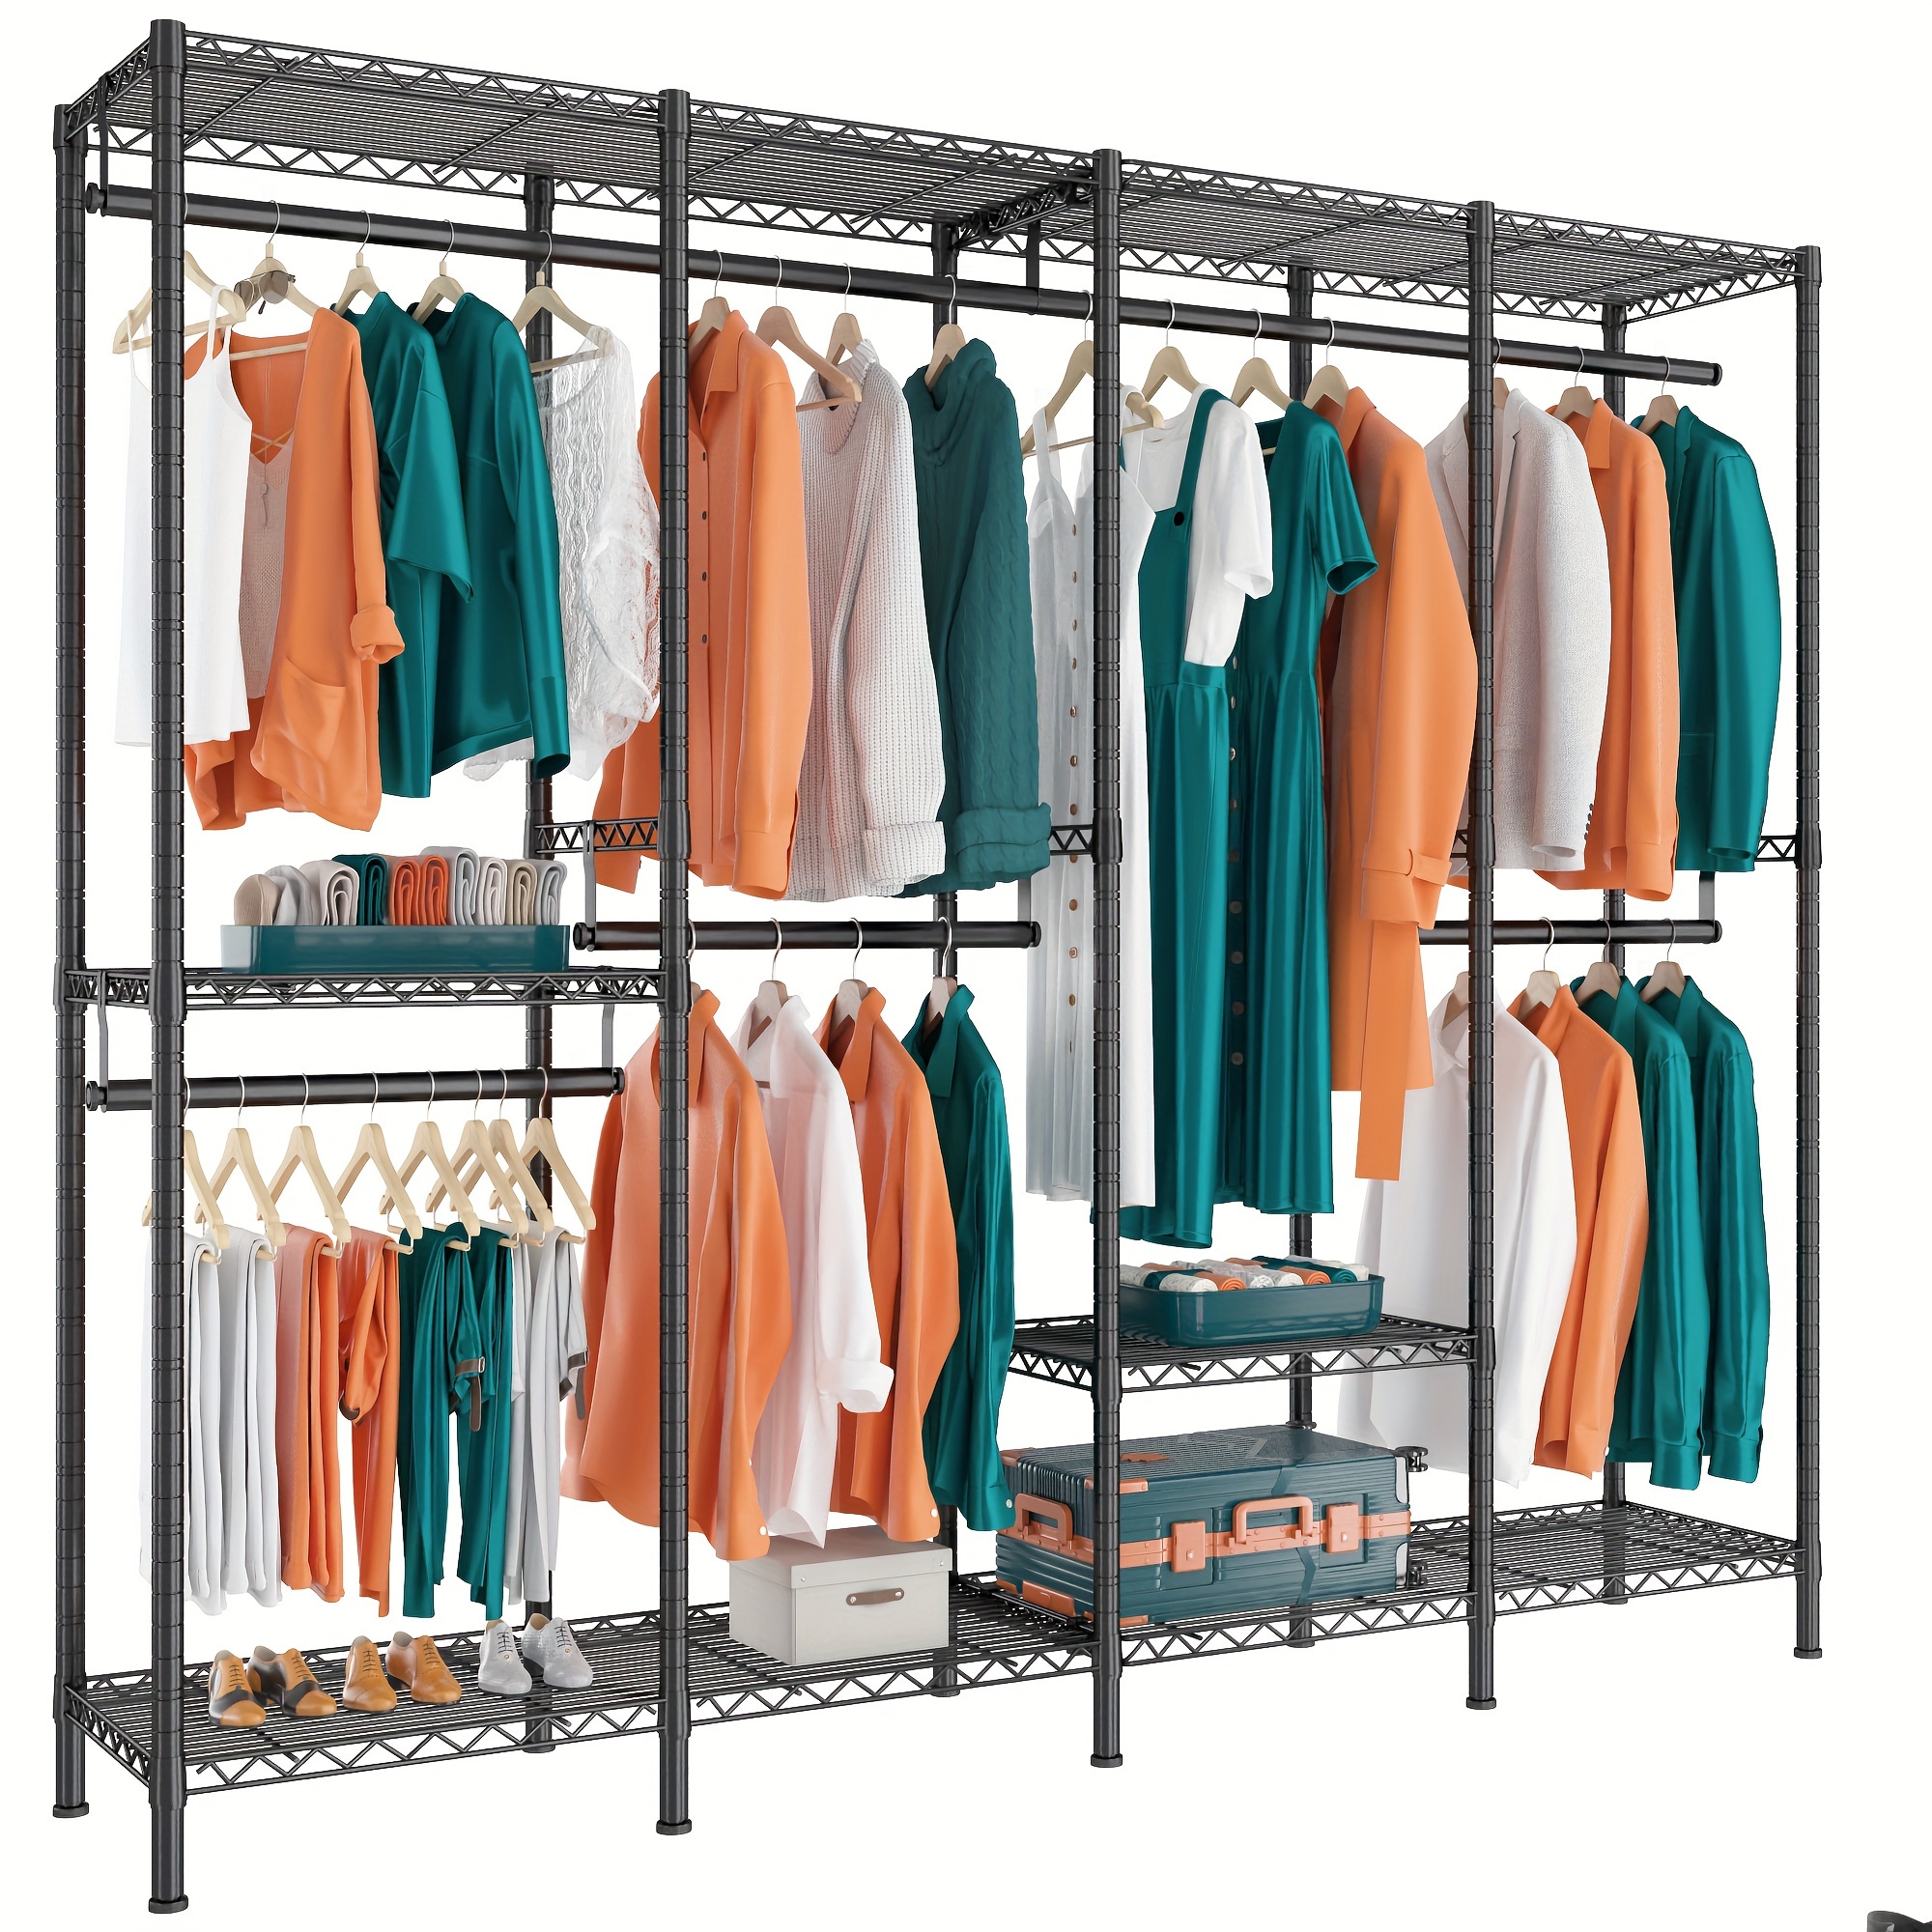 

Clothing Racks For Hanging Clothes Load 1100 Lbs Heavy Duty Clothes Rack With 5 Hanging Rods, 6 Shelves Freestanding Wadrobe Closet Adjustable Closet Rack, Black 18" D X 76" W X 77" H